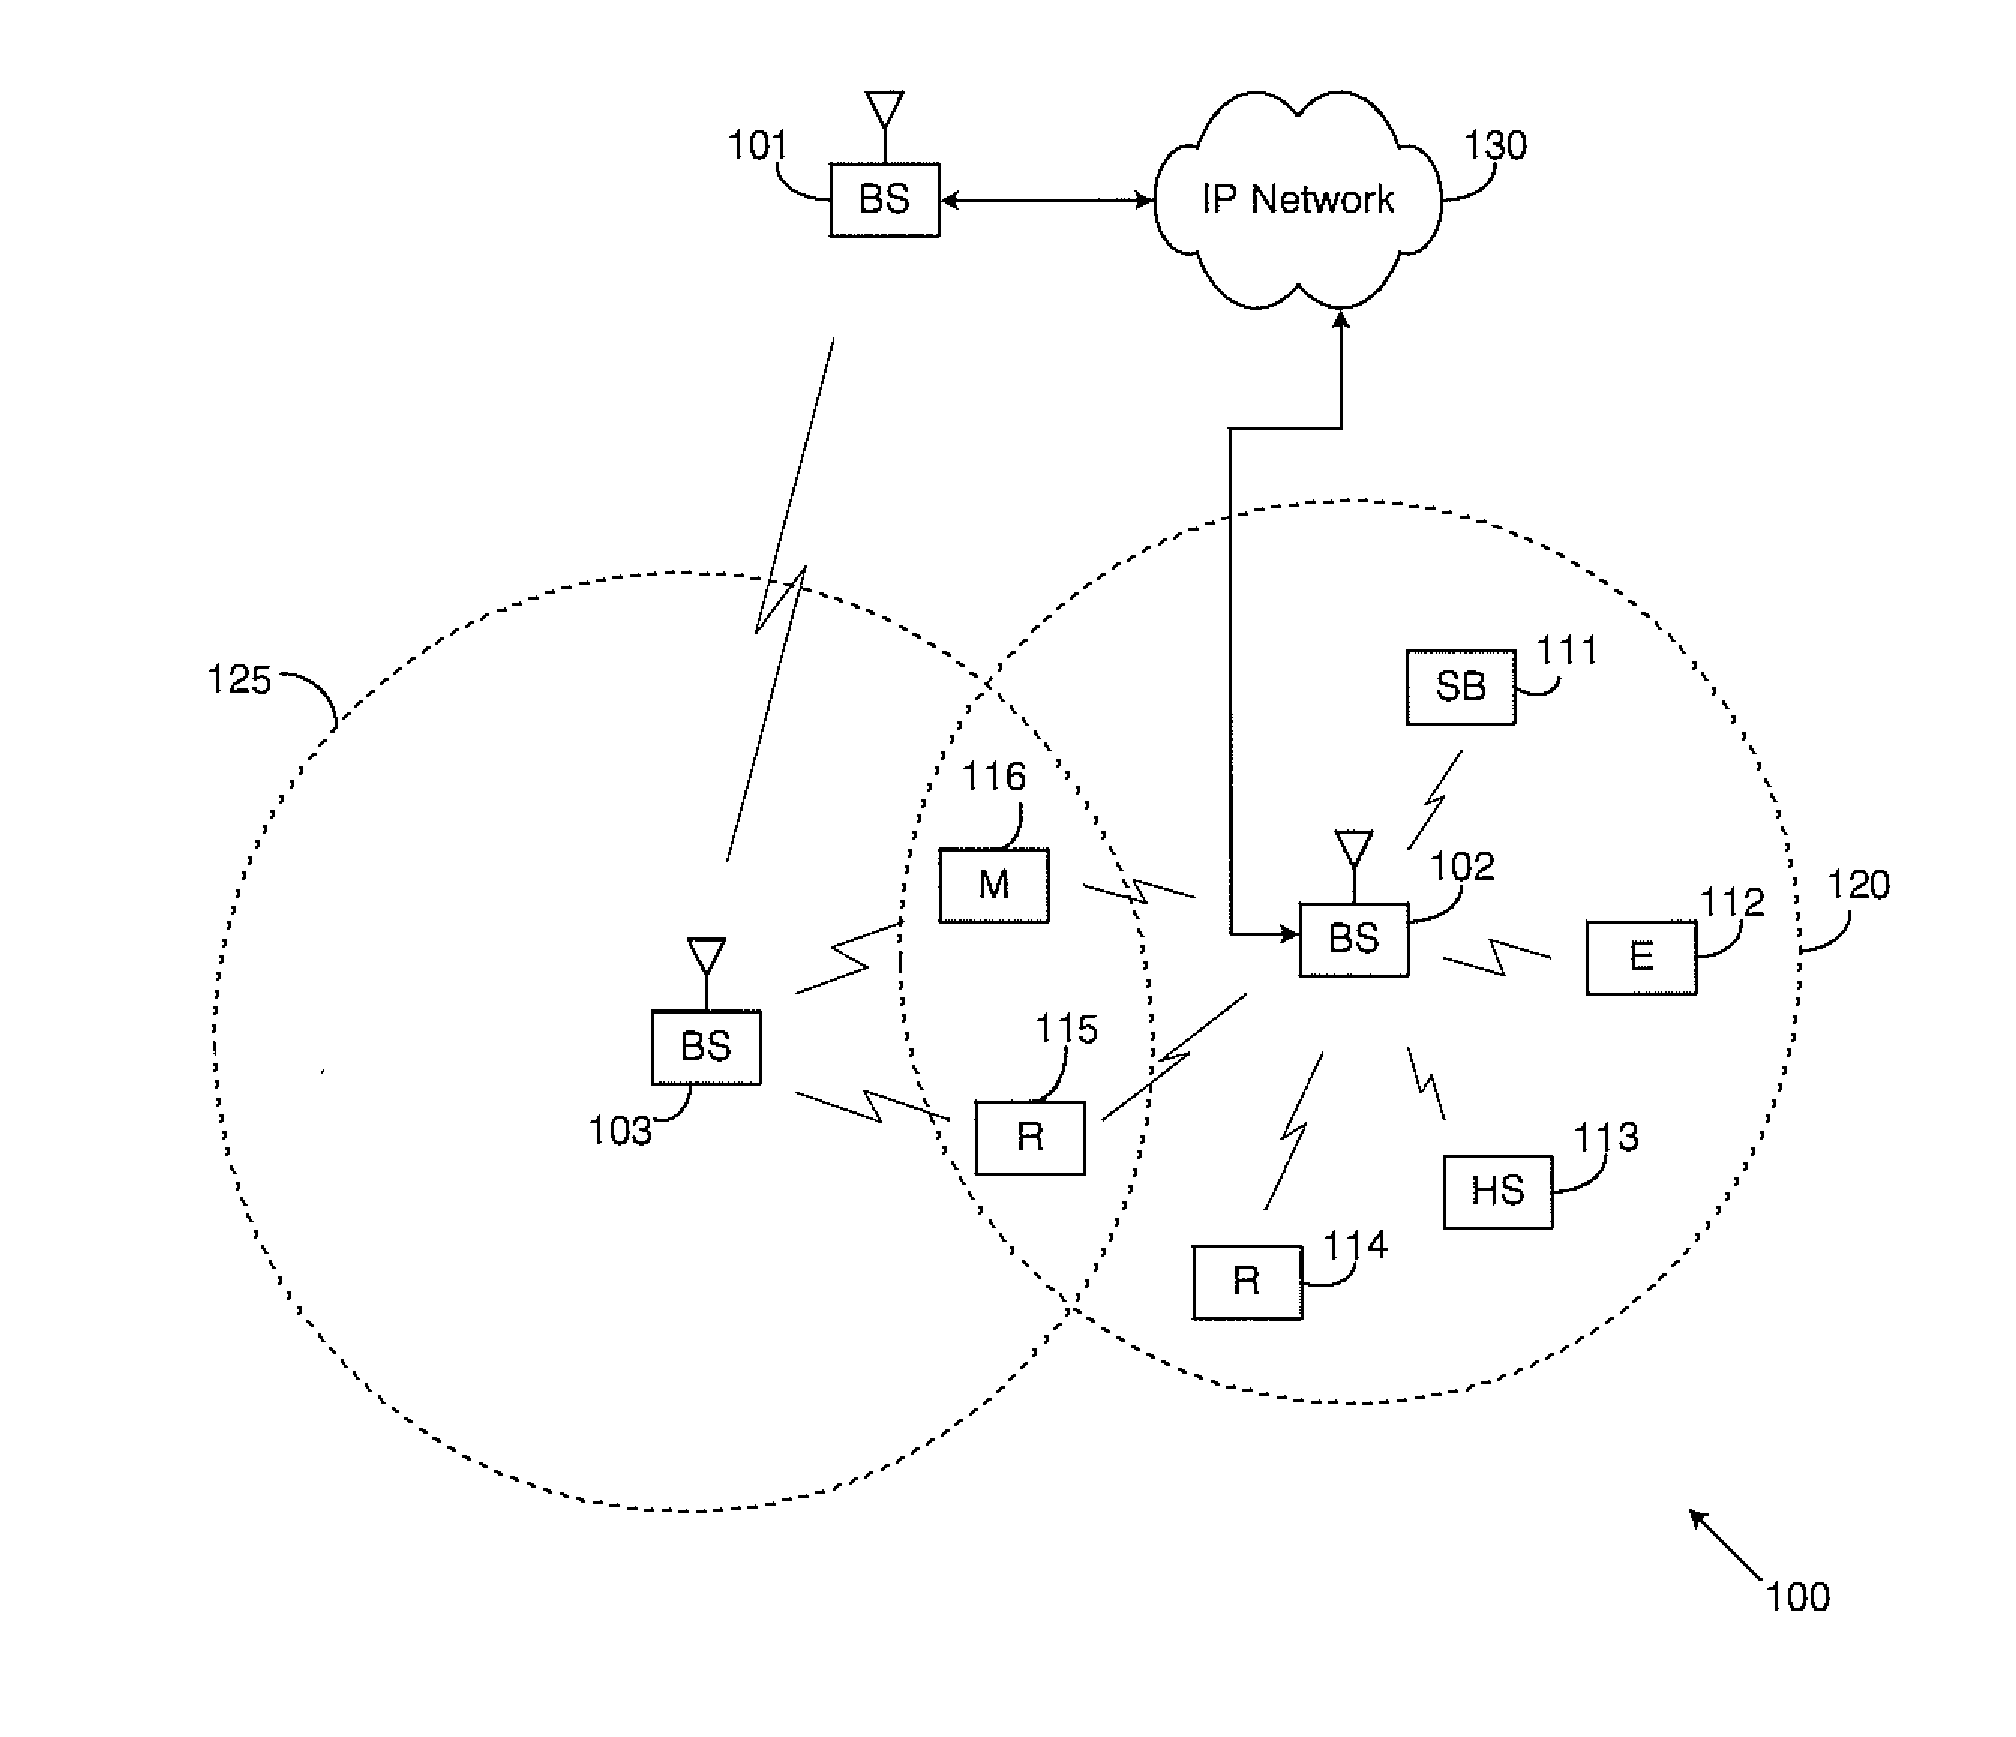 Systems and methods for cell search in multi-tier communication systems